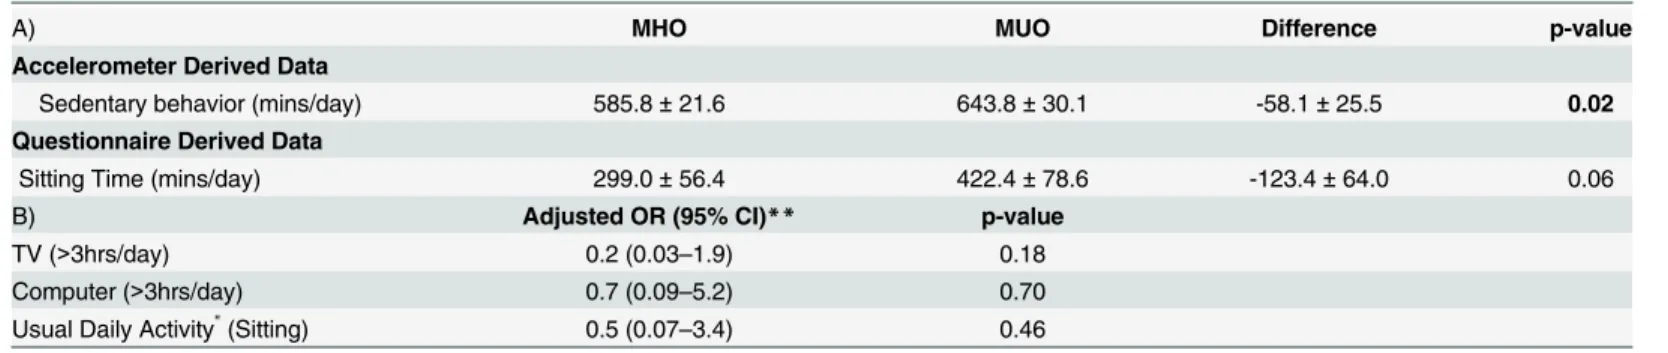 Table 3. Adjusted means * (A) and odds ratios (B) for sedentary behavior between MHO (n = 37) and MUO (n = 9).